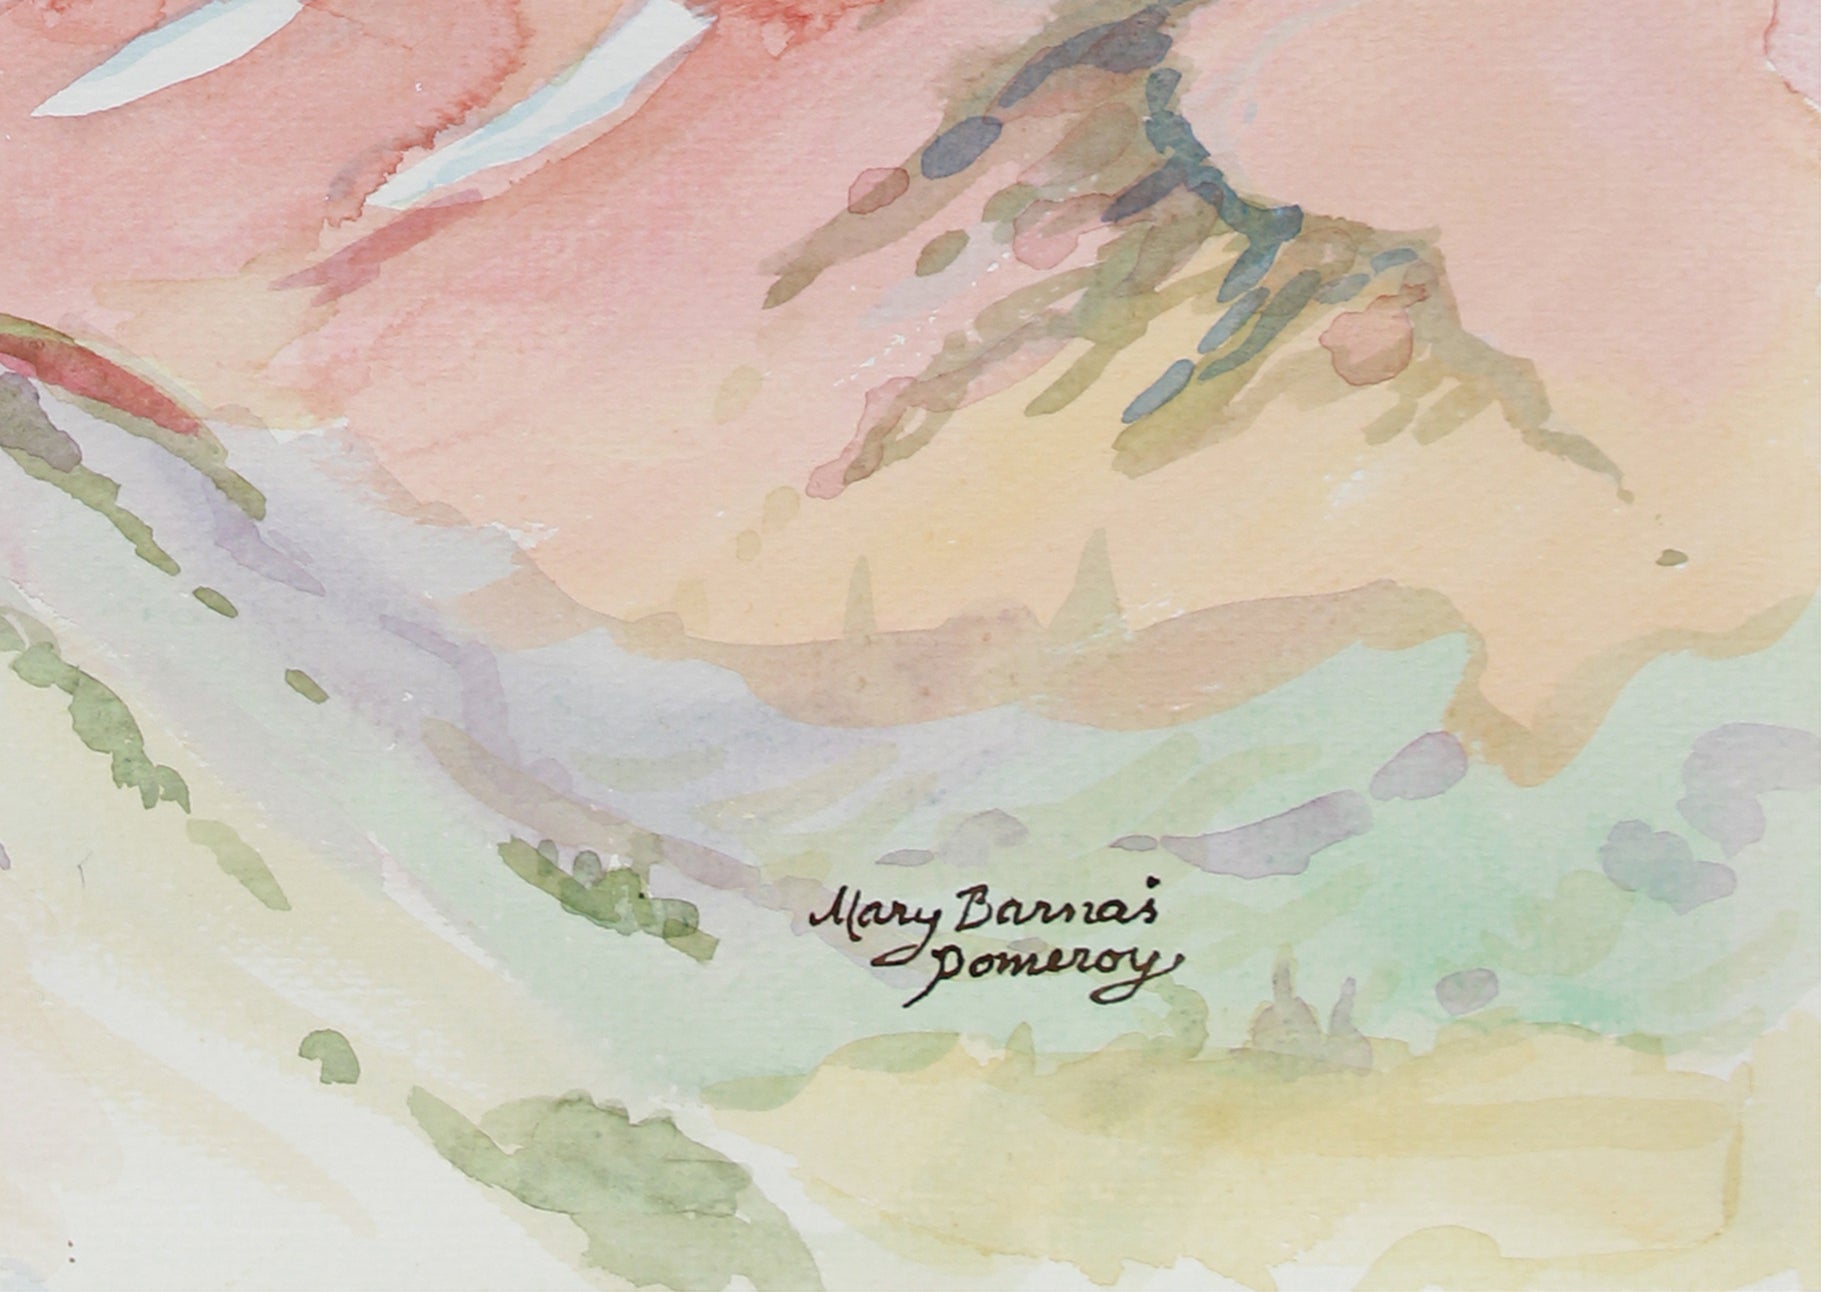 <i>Mount Shasta from above Panthen Meadows</i> <br> October 1999 Watercolor <br><br>B0536